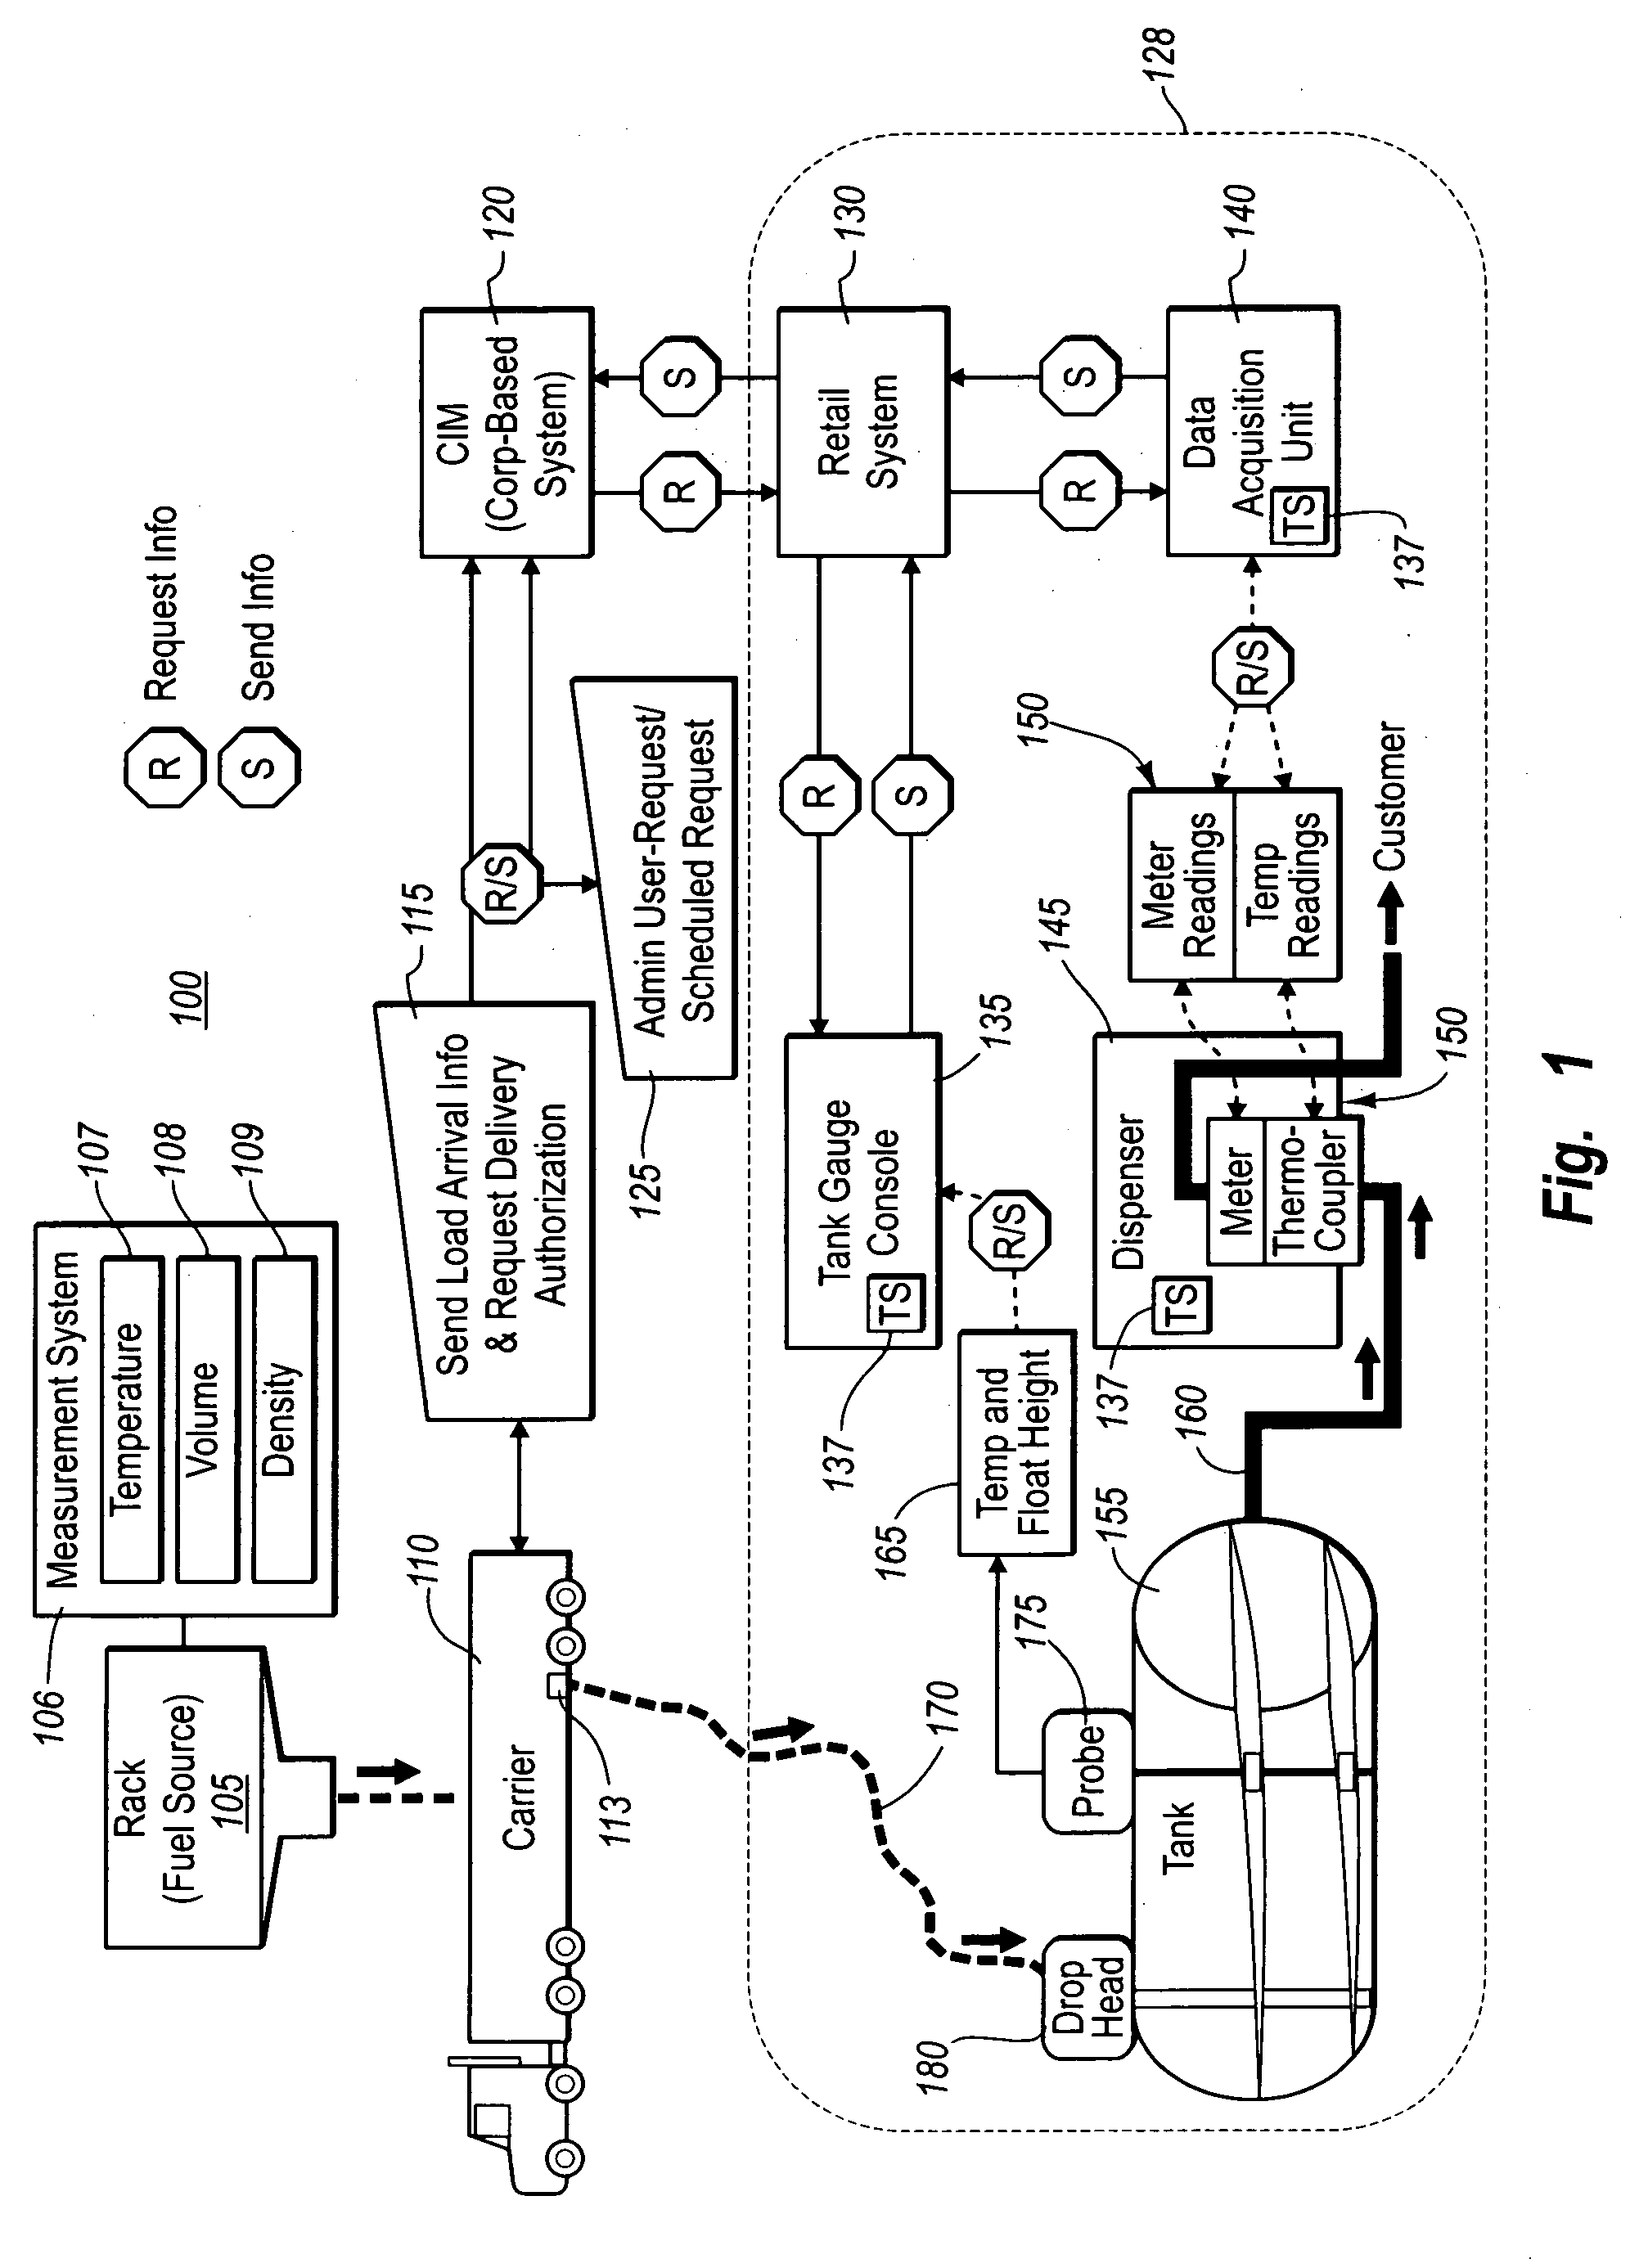 Methods and systems for measuring physical volume